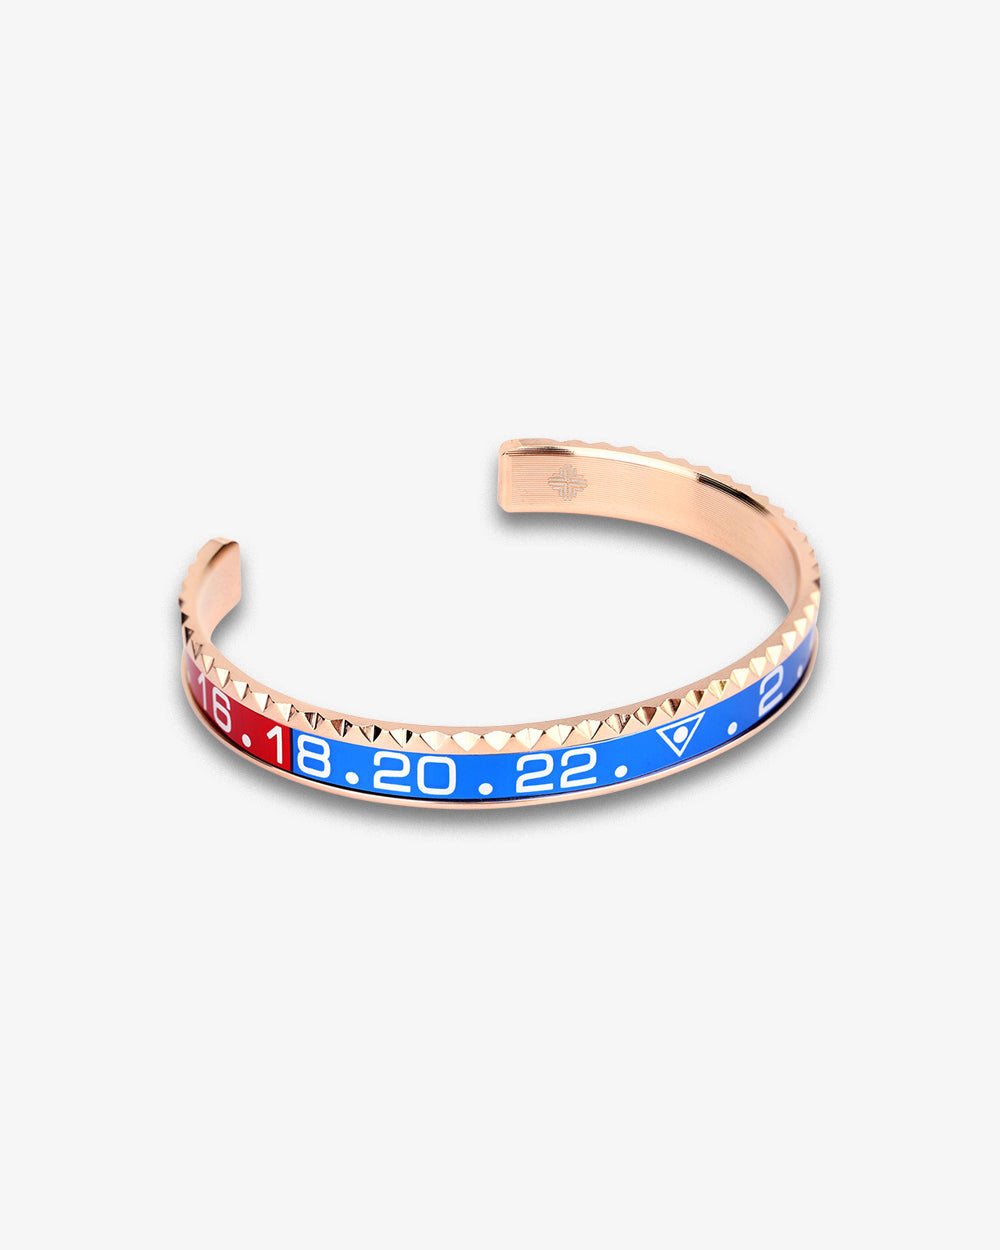 Swiss Concept Classic Roman Numeral Speed Bracelet (Red & Rose Gold)